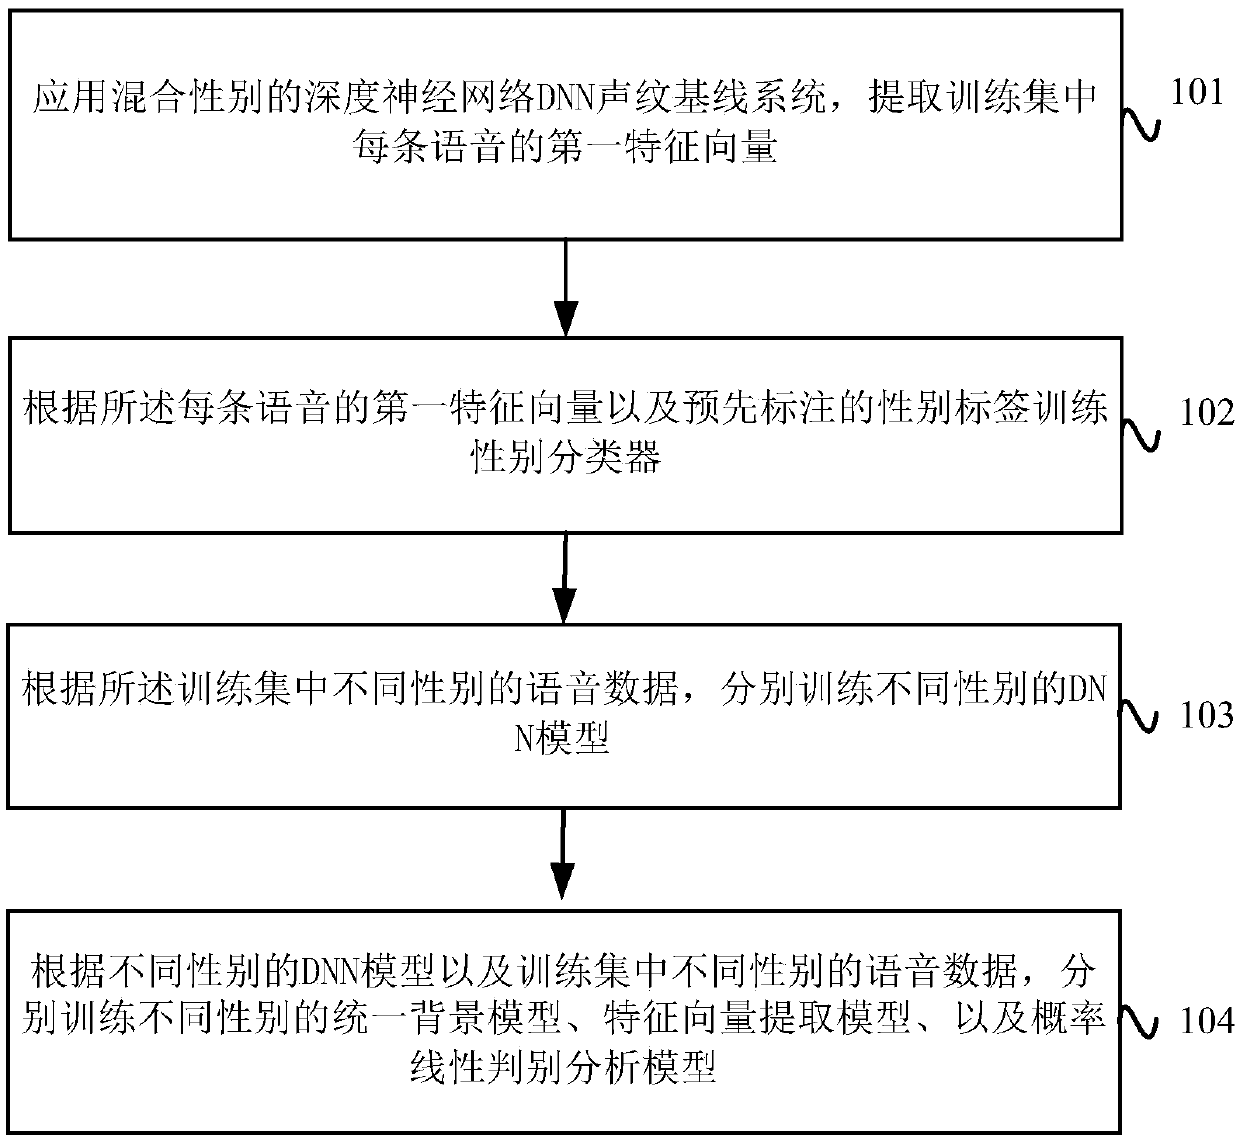 Voiceprint authentication processing method and apparatus